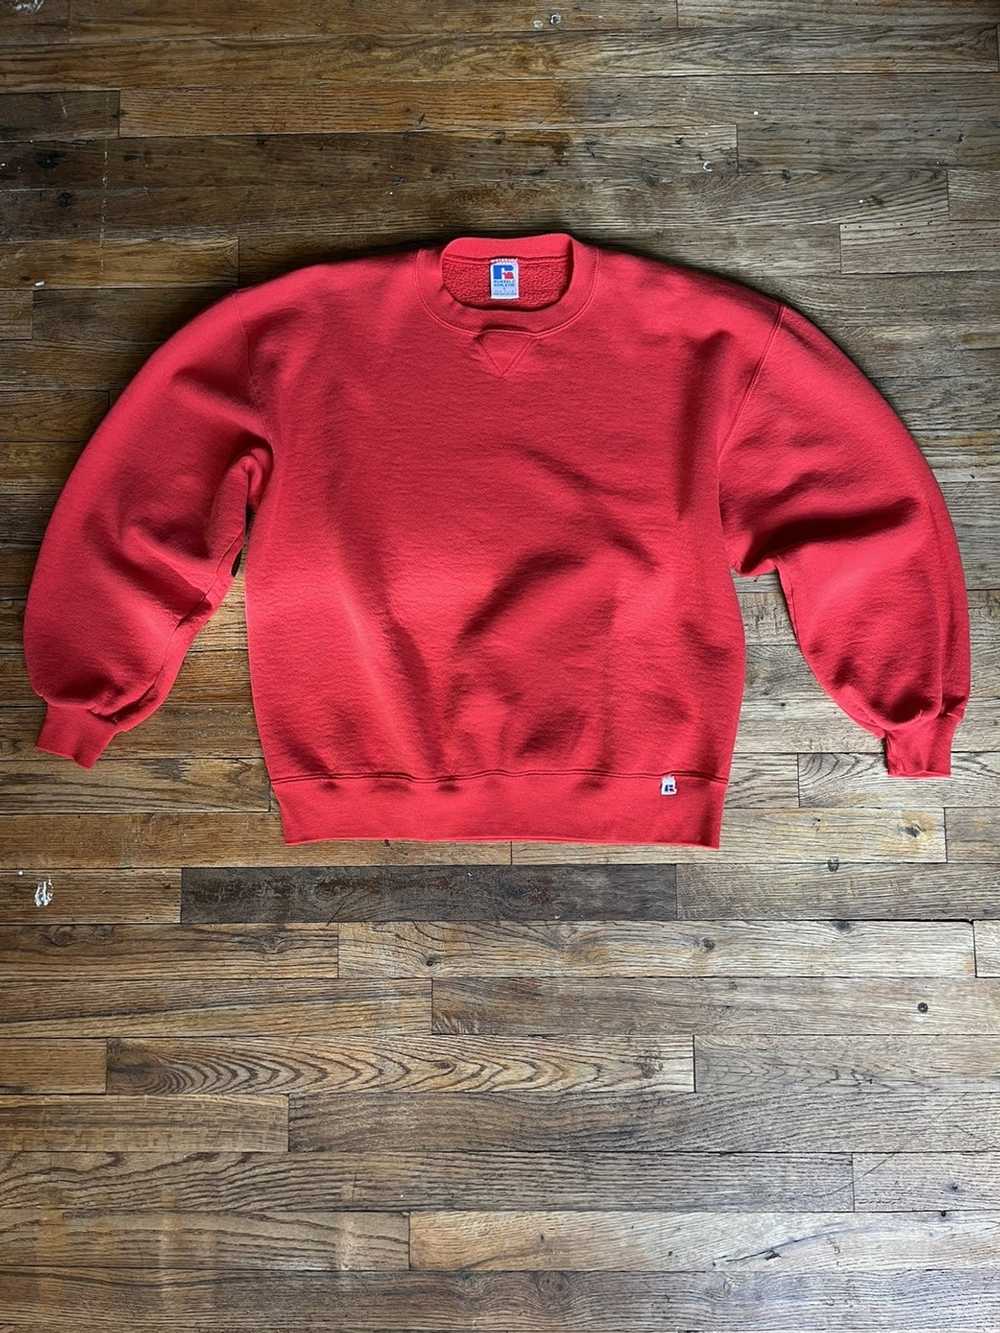 Russell Athletic 90’s Russell crewneck - image 2